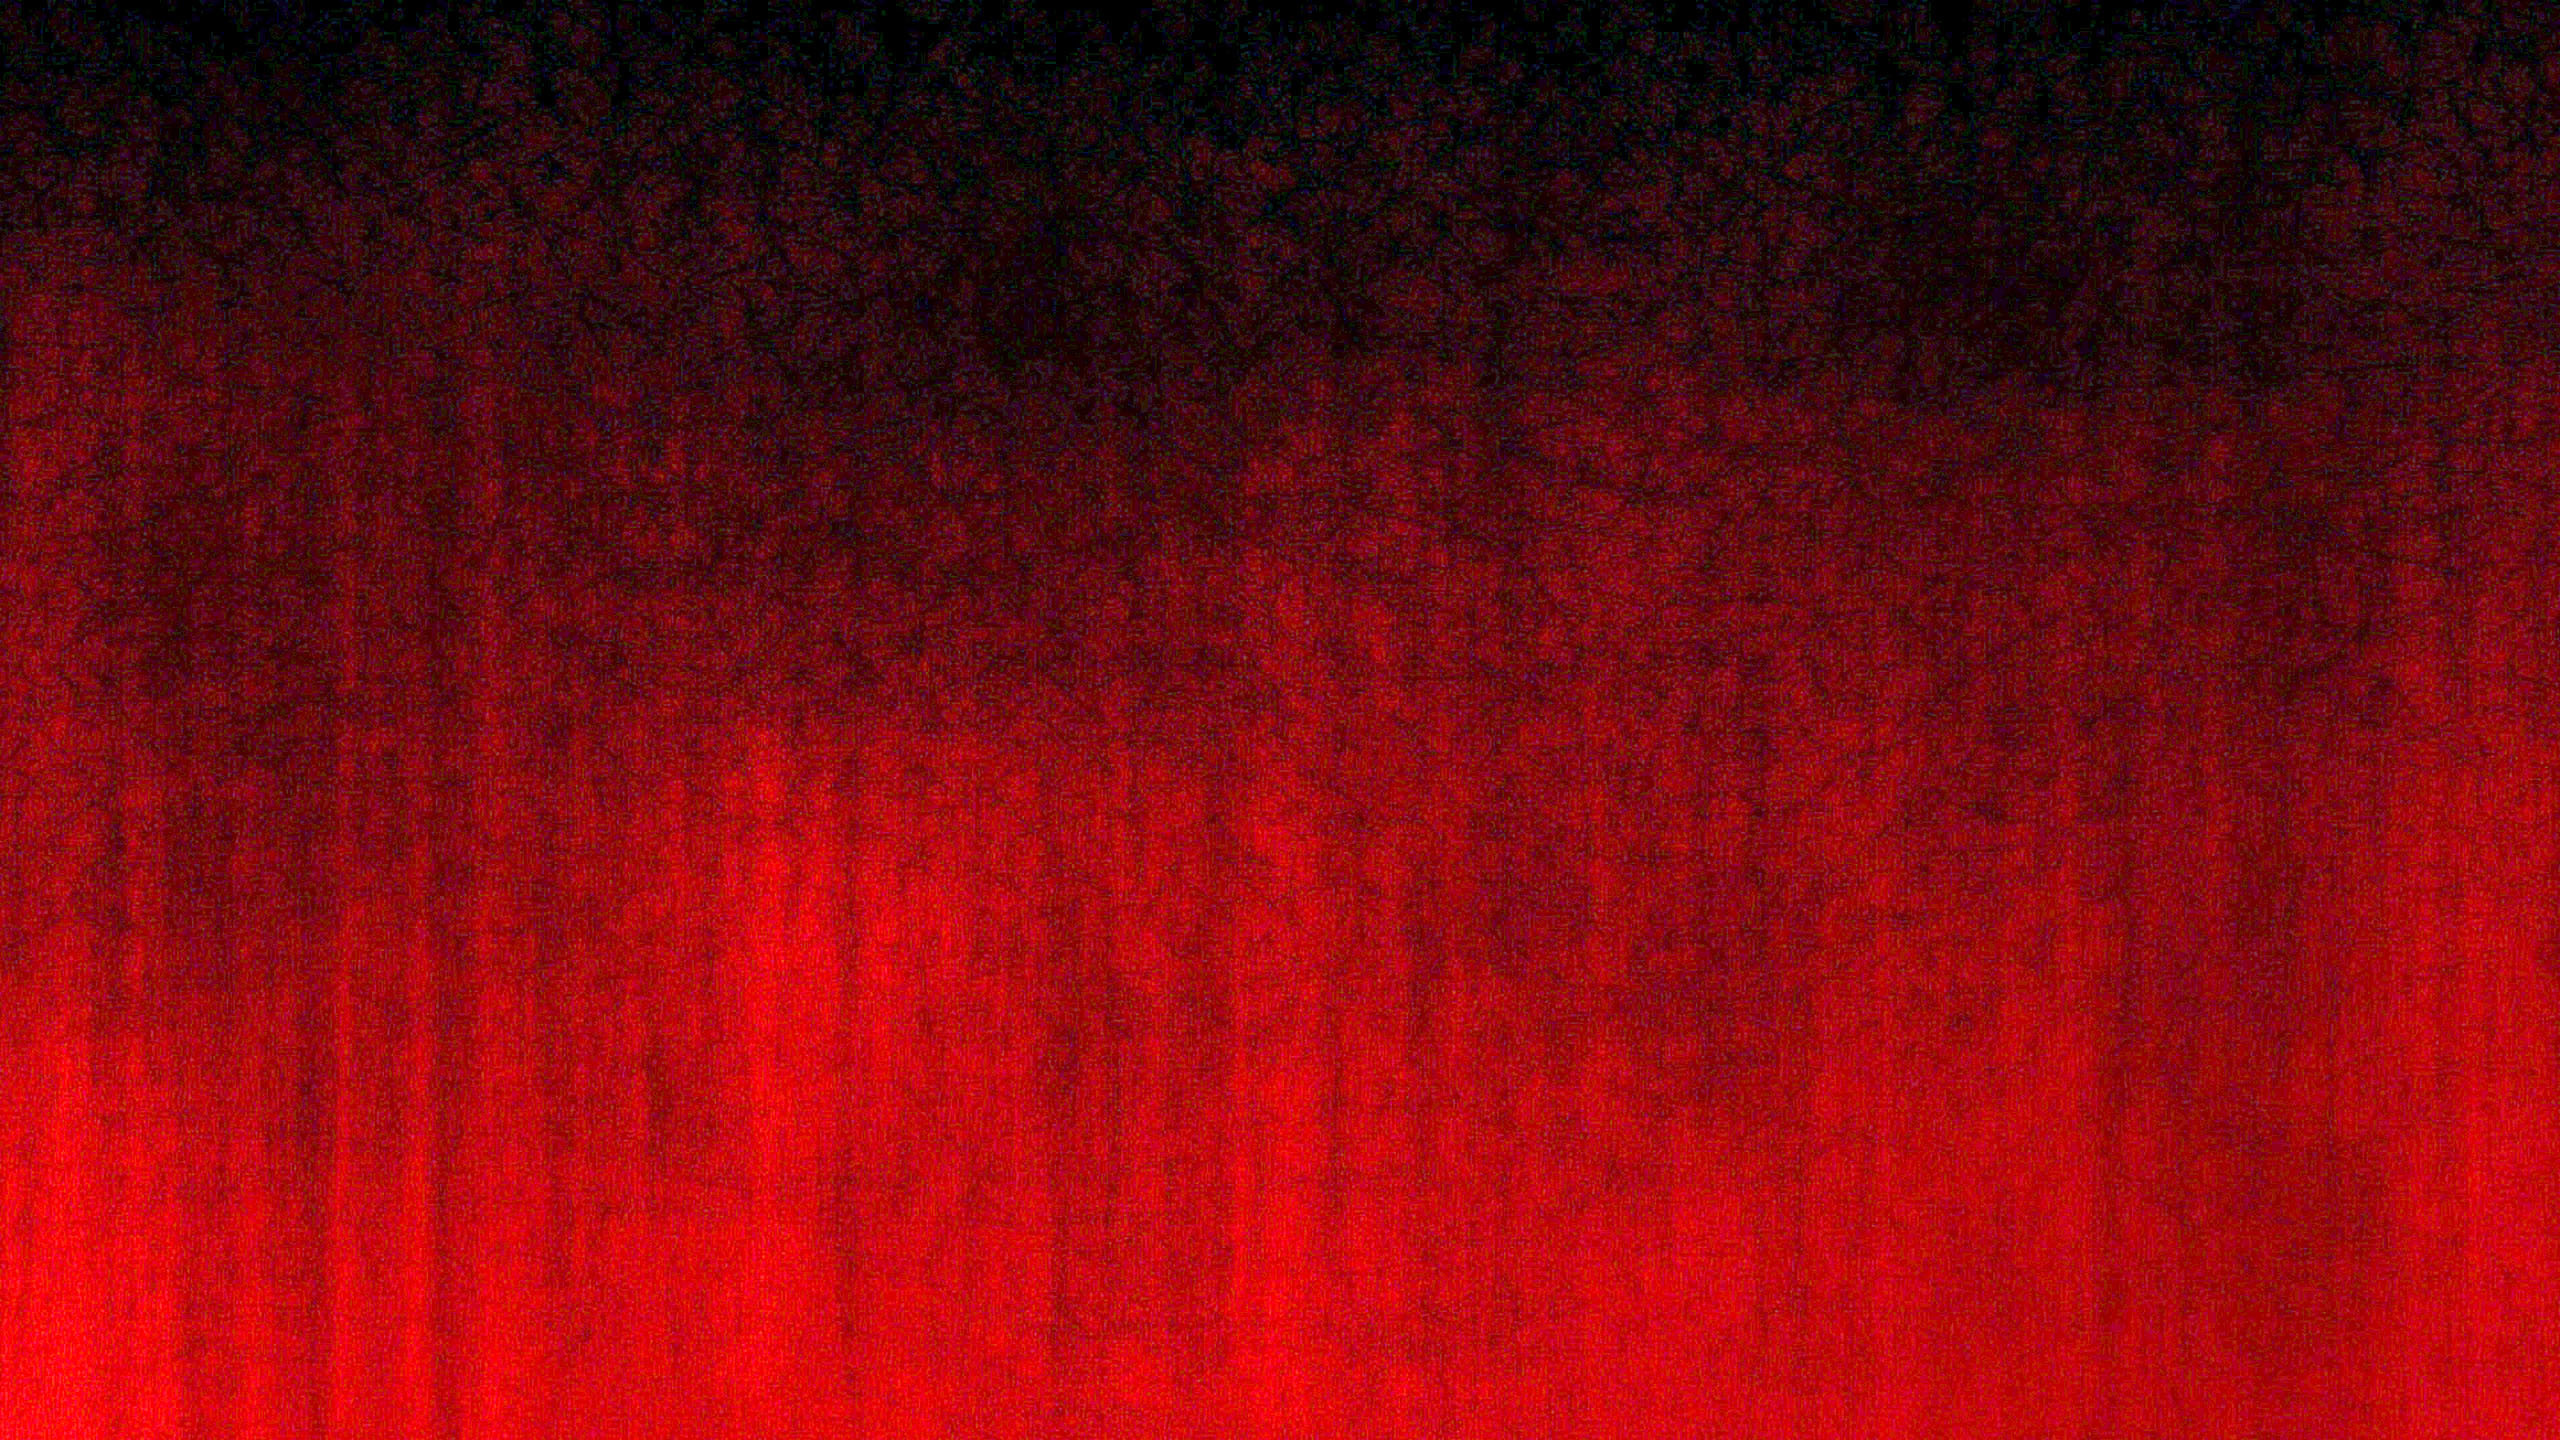 2560x1440 ... Black Red Grunge Texture At Dragway 2017 free powerpoint background